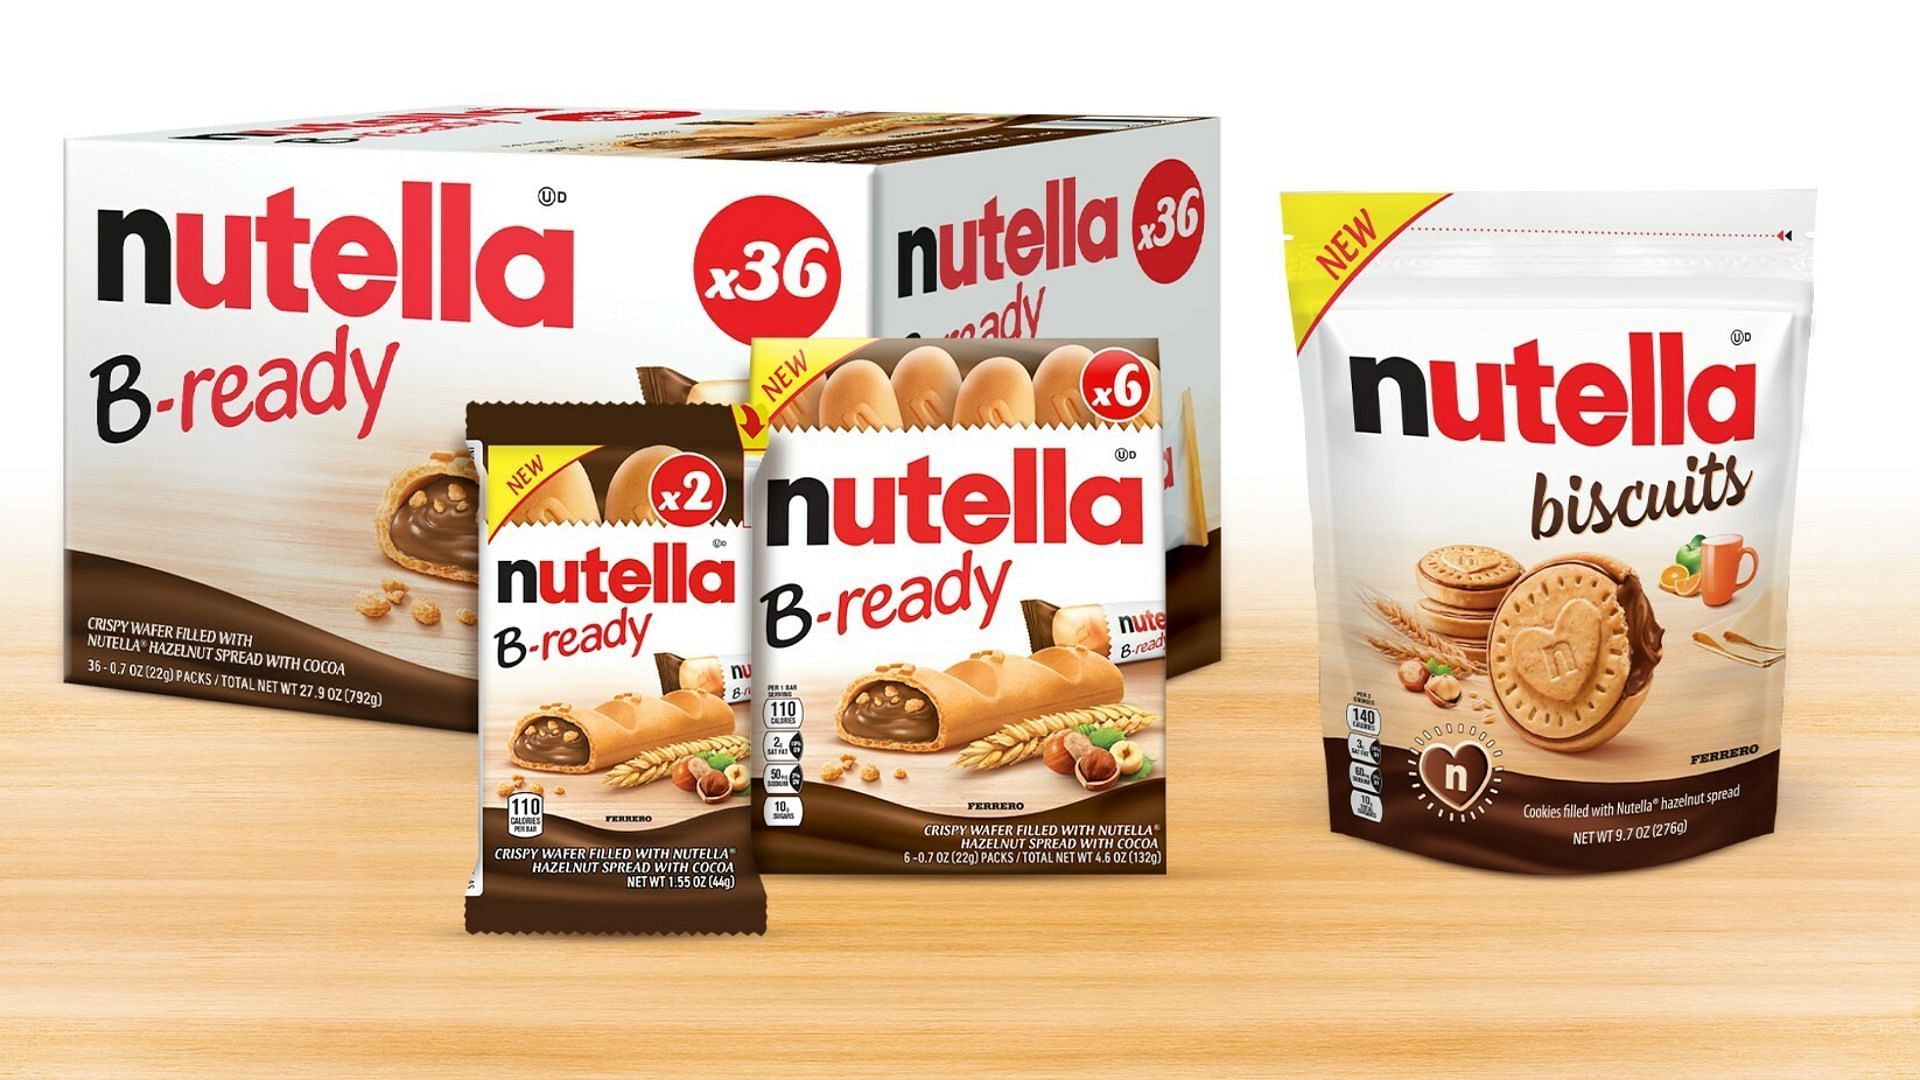 The new products will be available across the country (Image via Nutella)